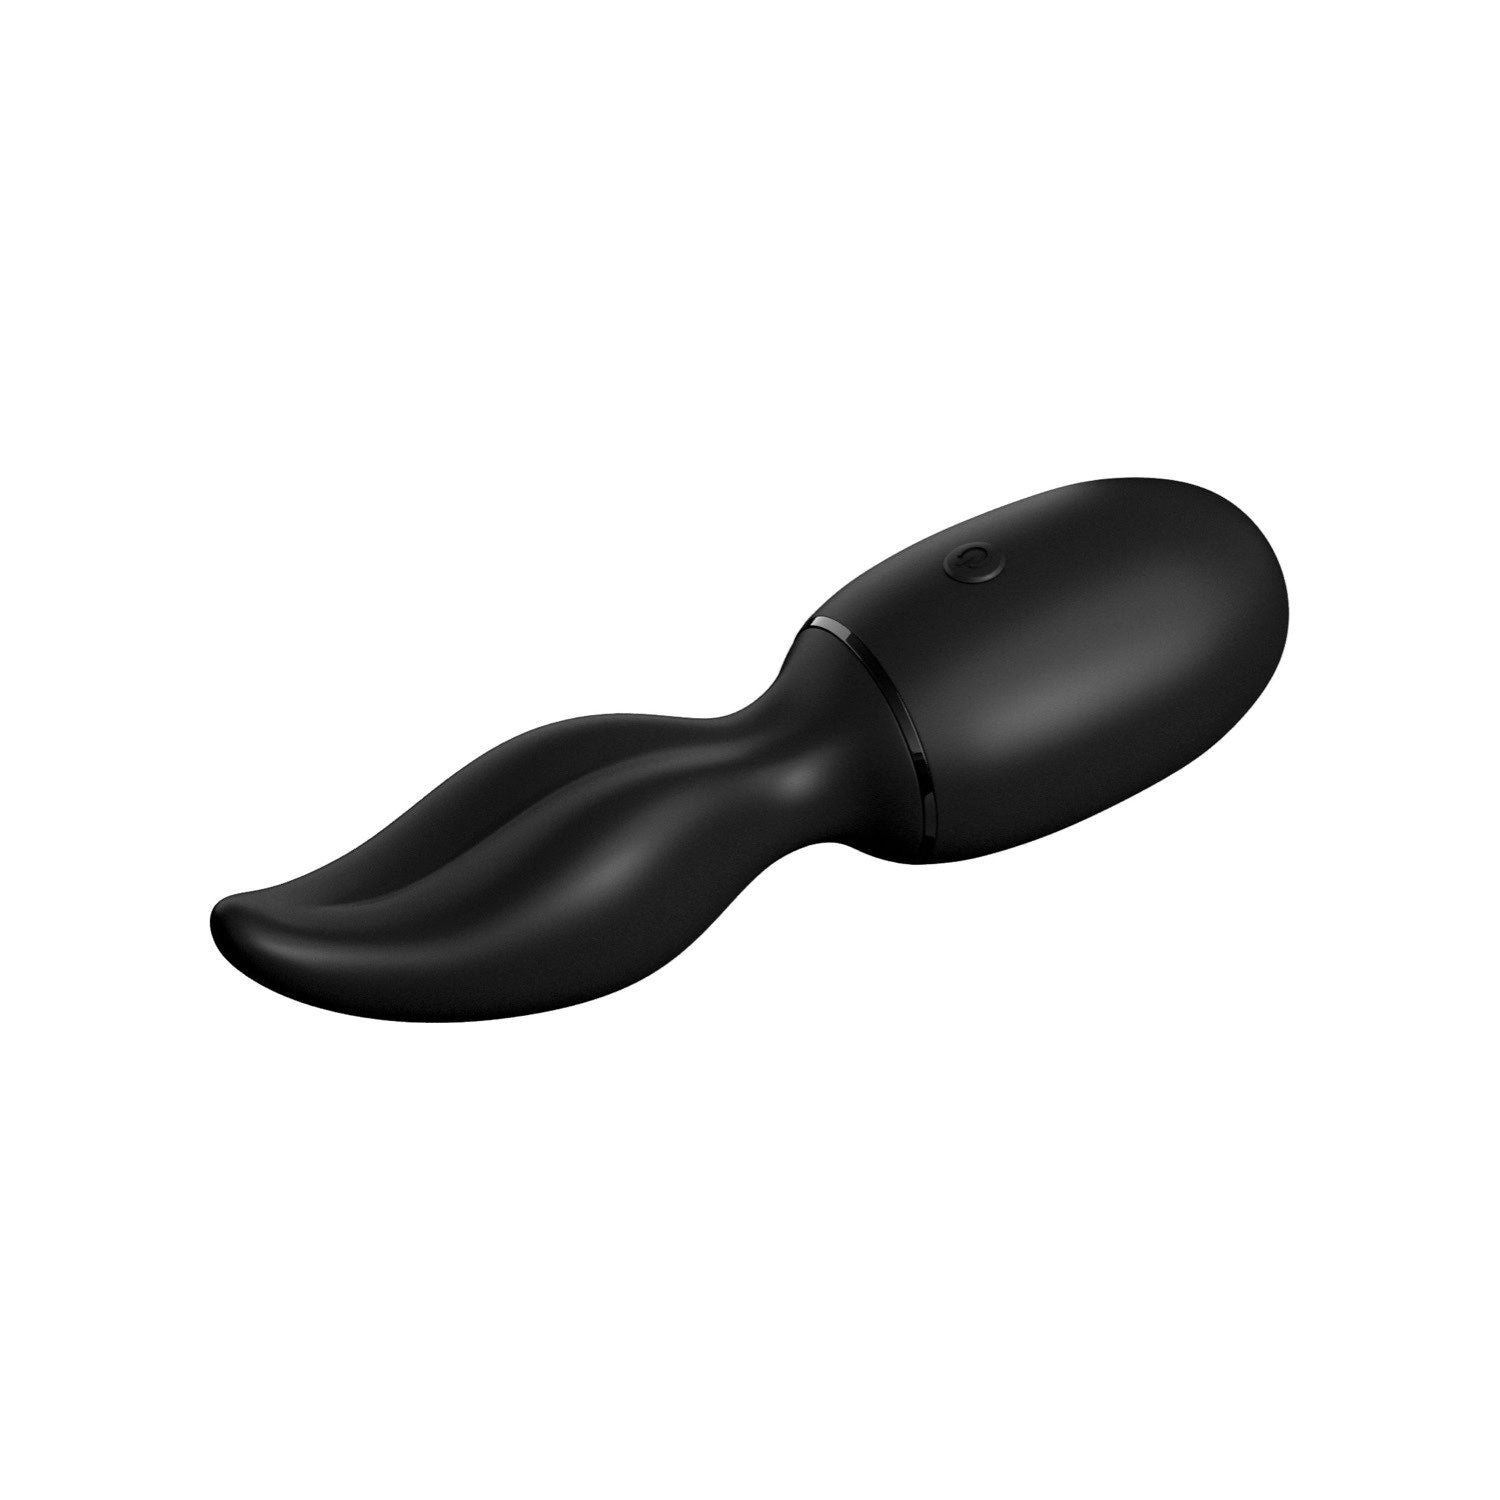 Sir Richards Control Ultimate Silicone Rimmer - Black USB Rechargeable Anal Stimulator by Pipedream